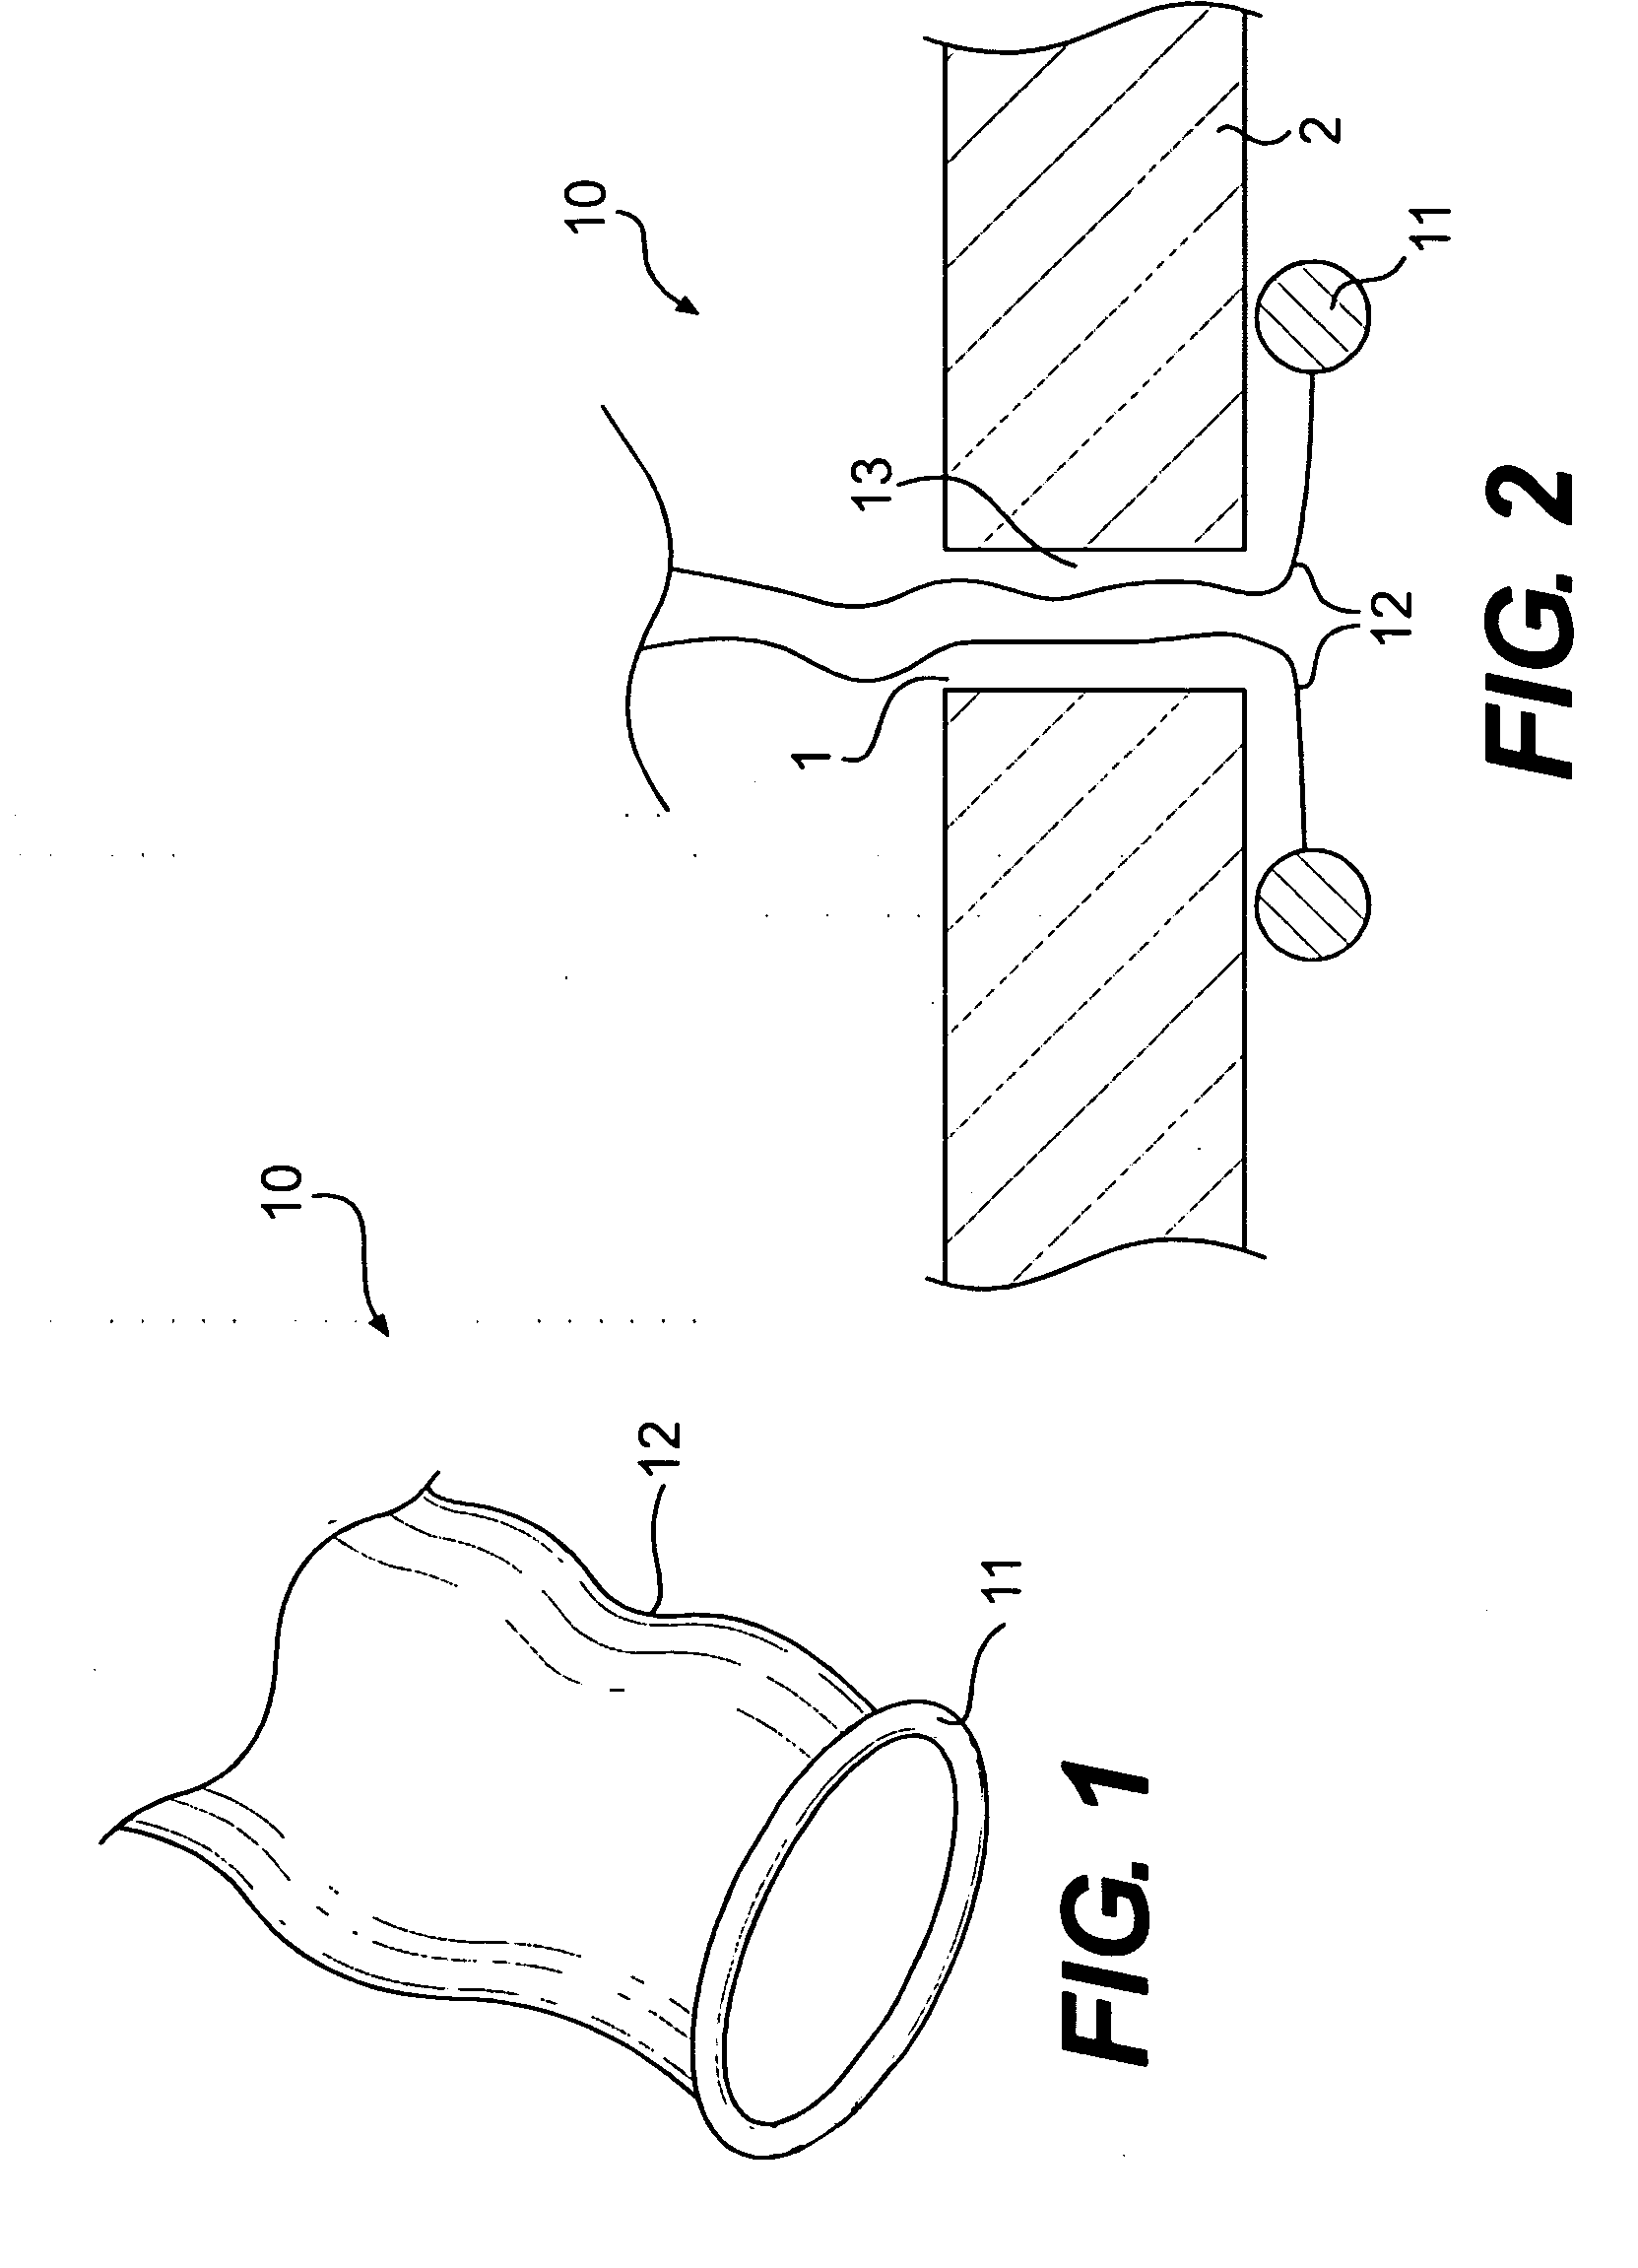 Instrument access device